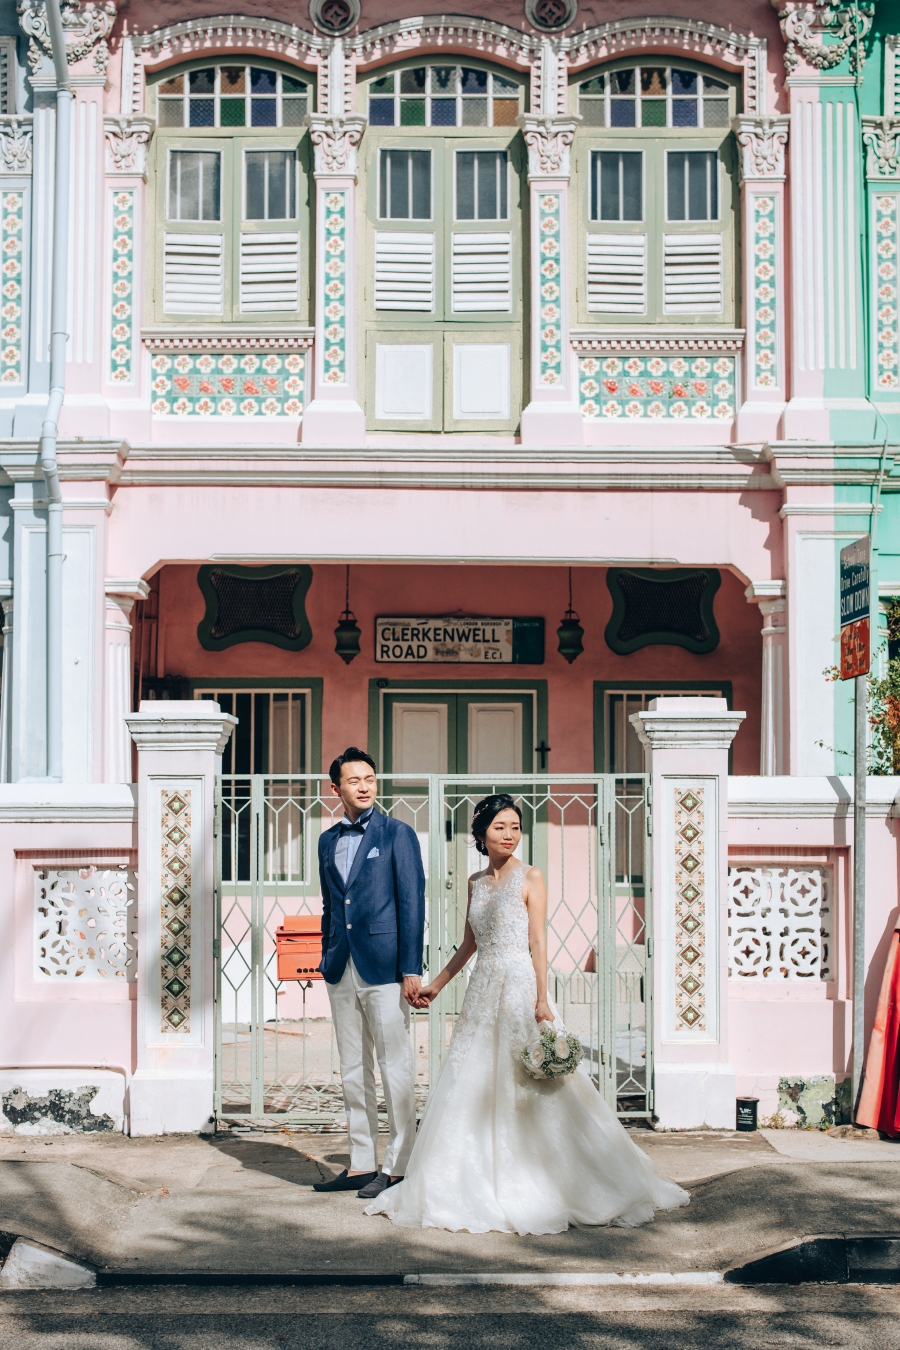 Singapore Pre-Wedding Photoshoot At Joo Chiat Street Peranakan Houses And Local Hawker Centre by Cheng on OneThreeOneFour 2